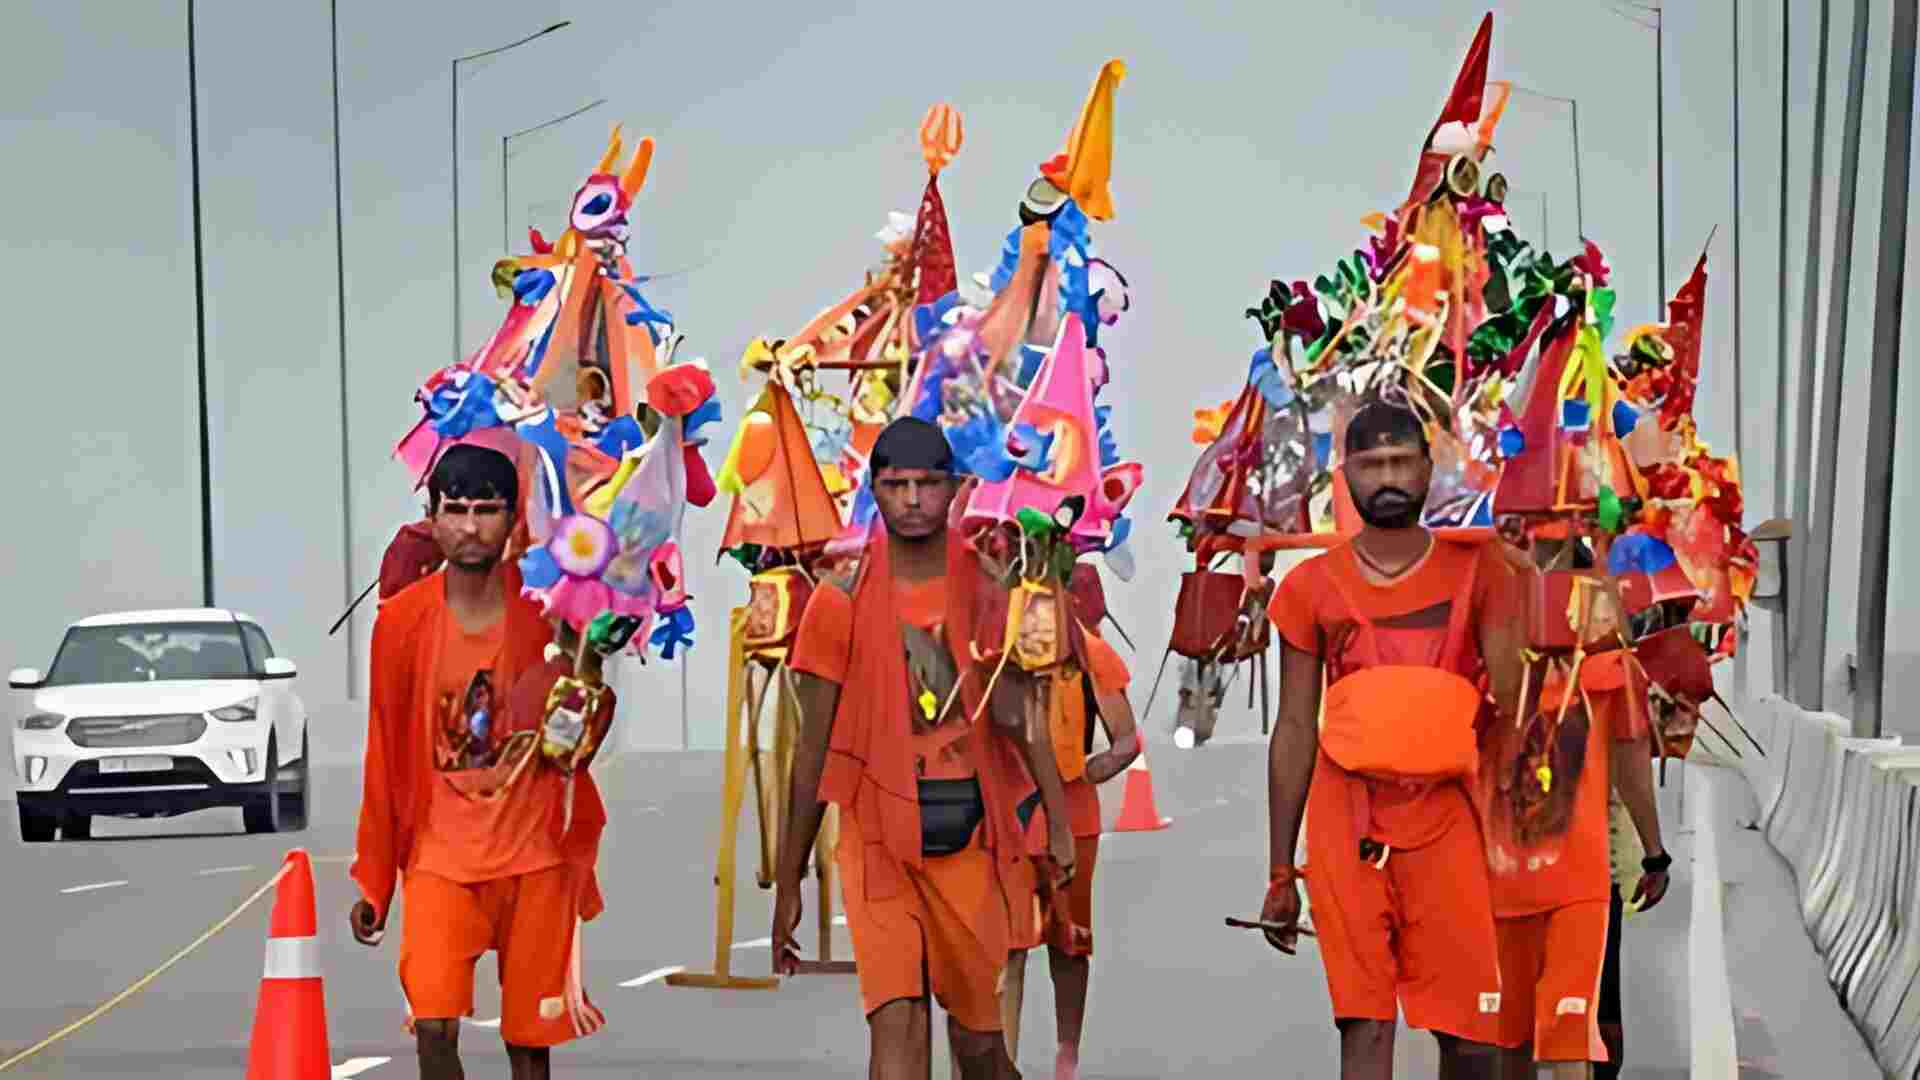 SC Extends Interim Stay On Kanwar Yatra Order, Rules On Disclosure Of Names